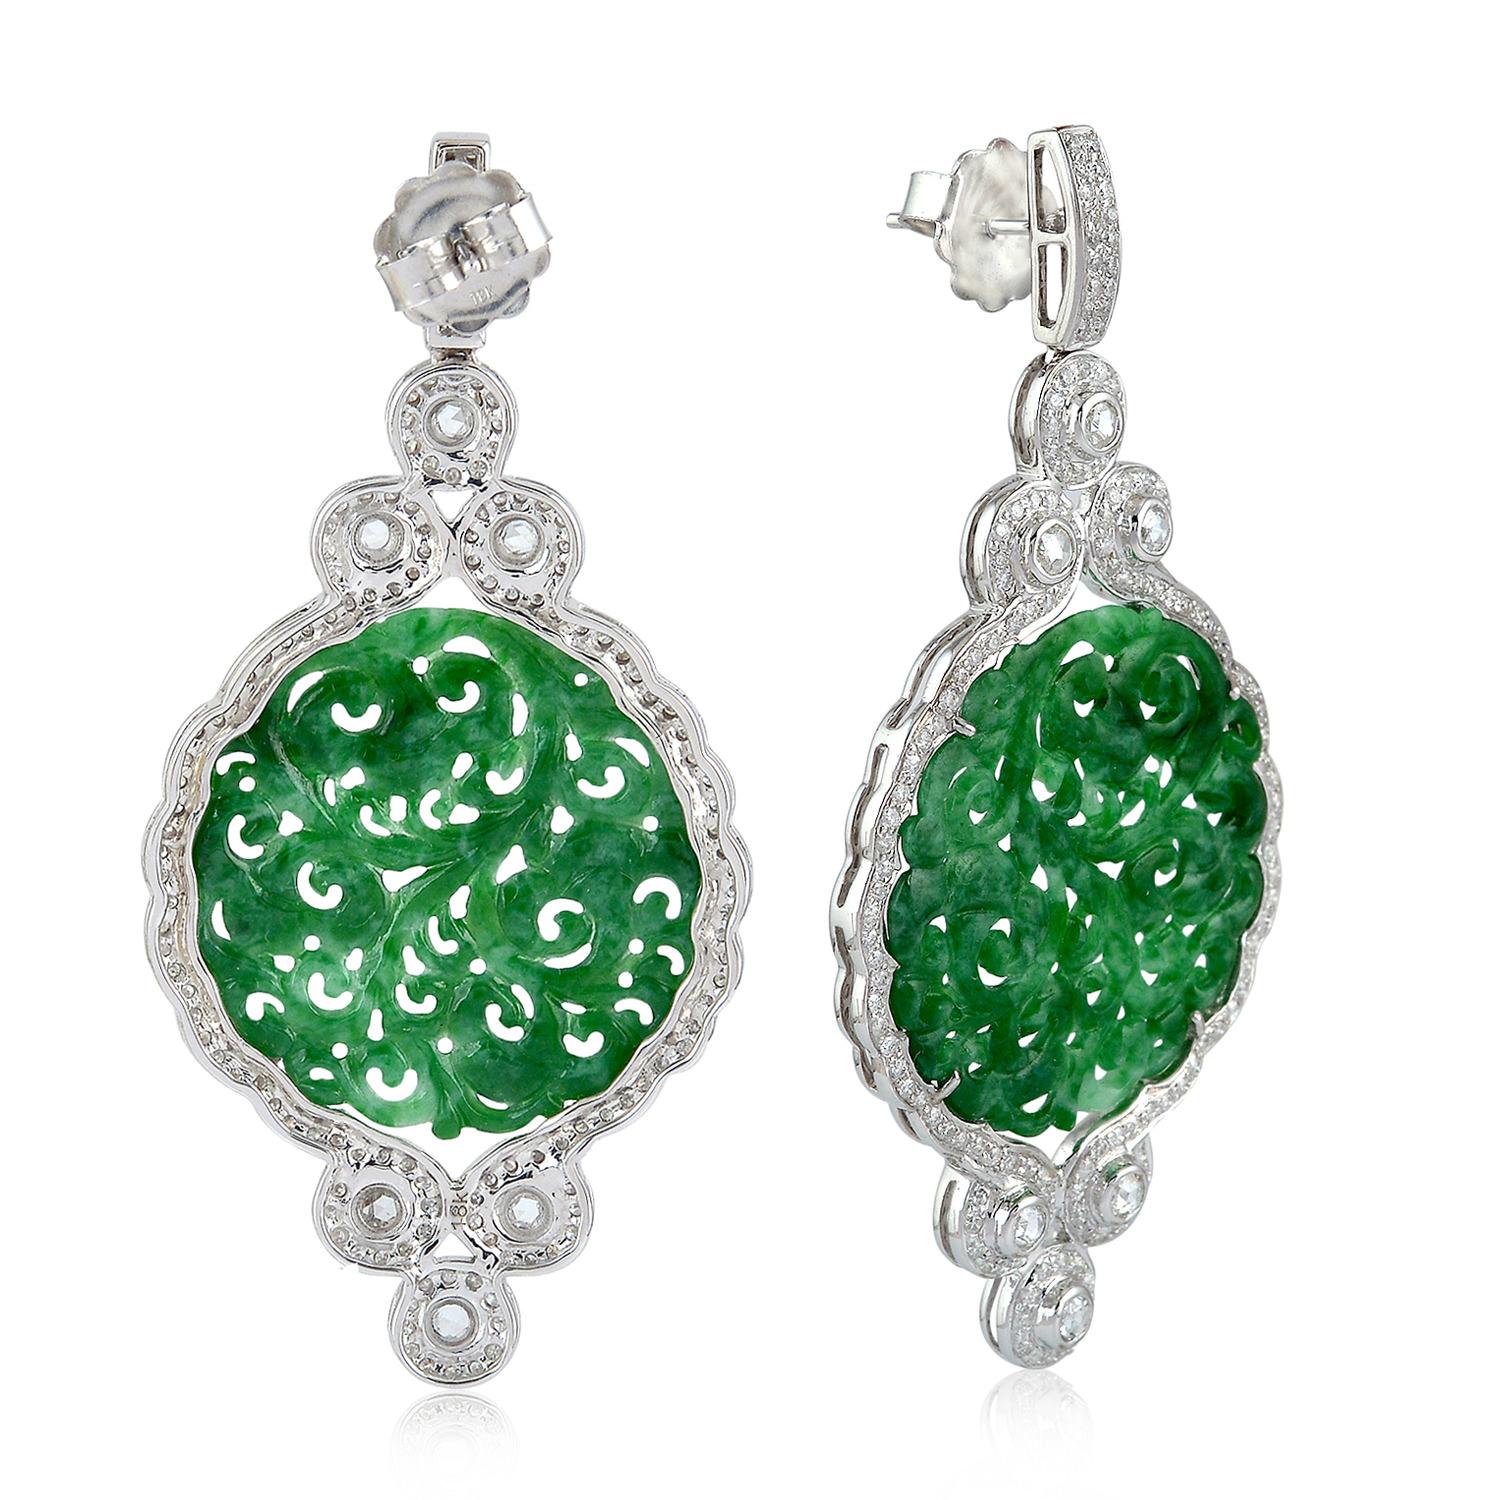 Contemporary 18.2ct Carved Jade Dangle Earrings With Diamonds Made In 18k White Gold For Sale